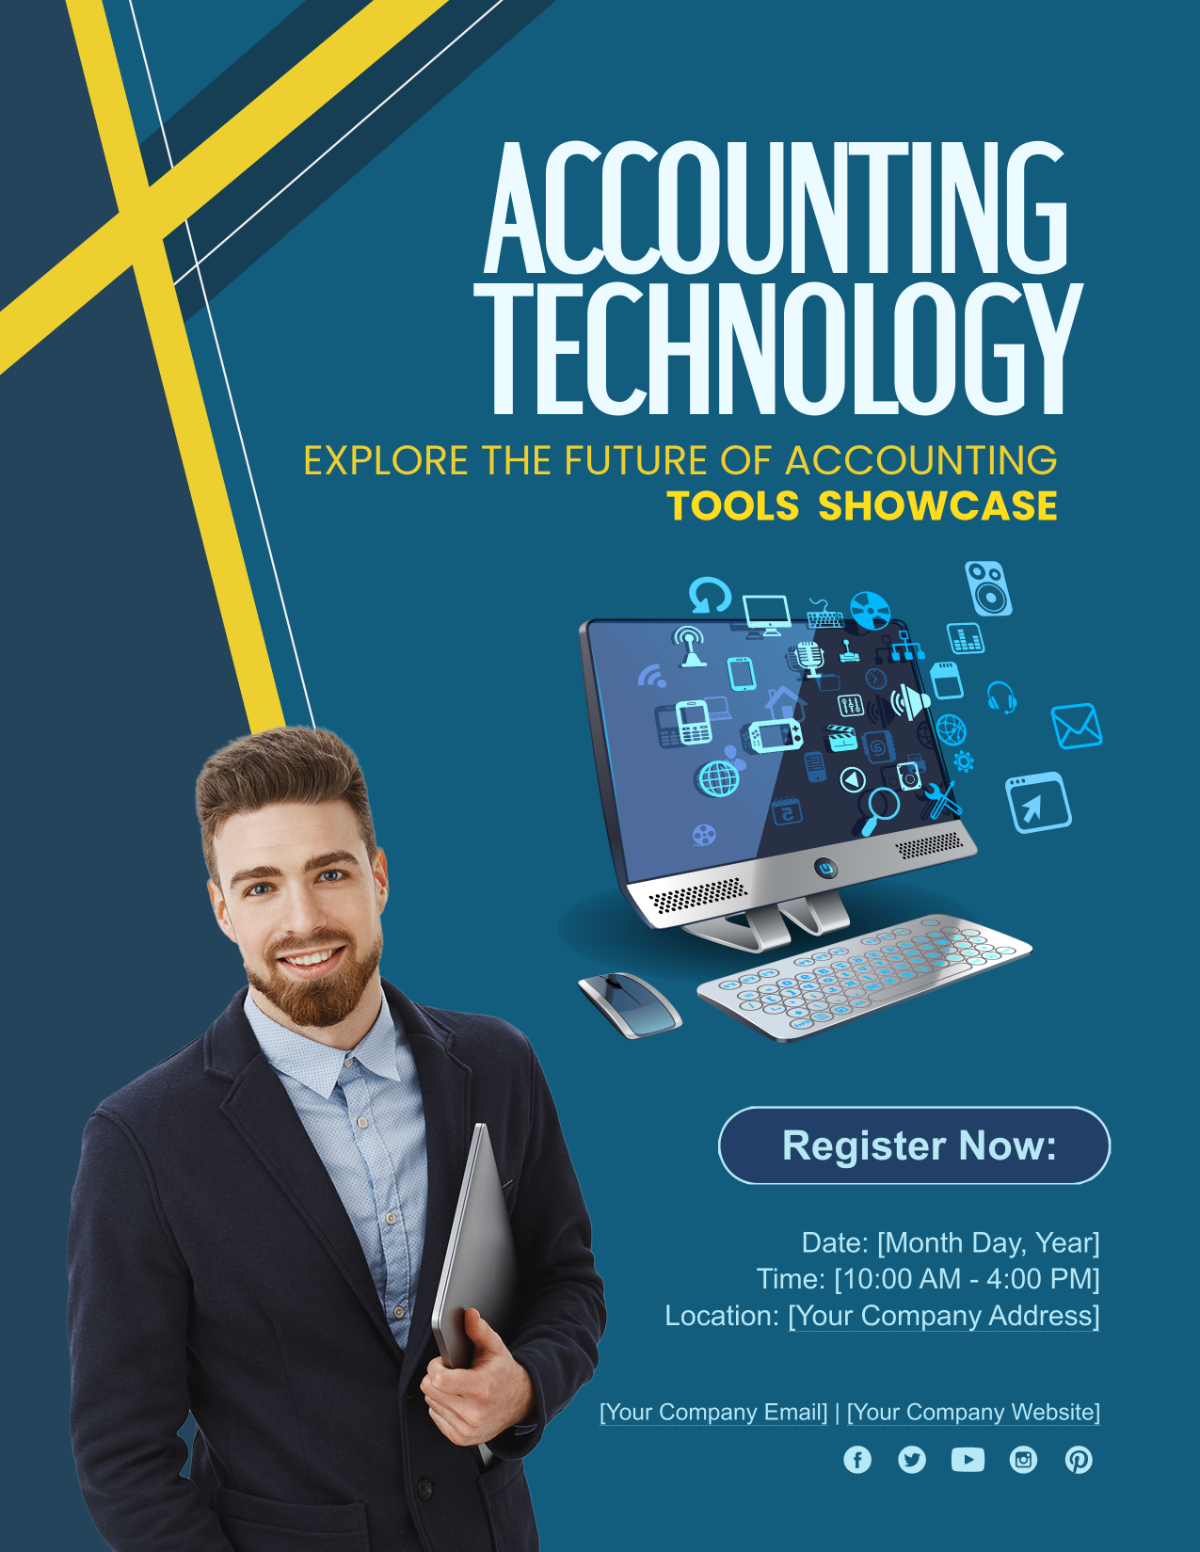 Accounting Technology Tools Showcase Flyer Template